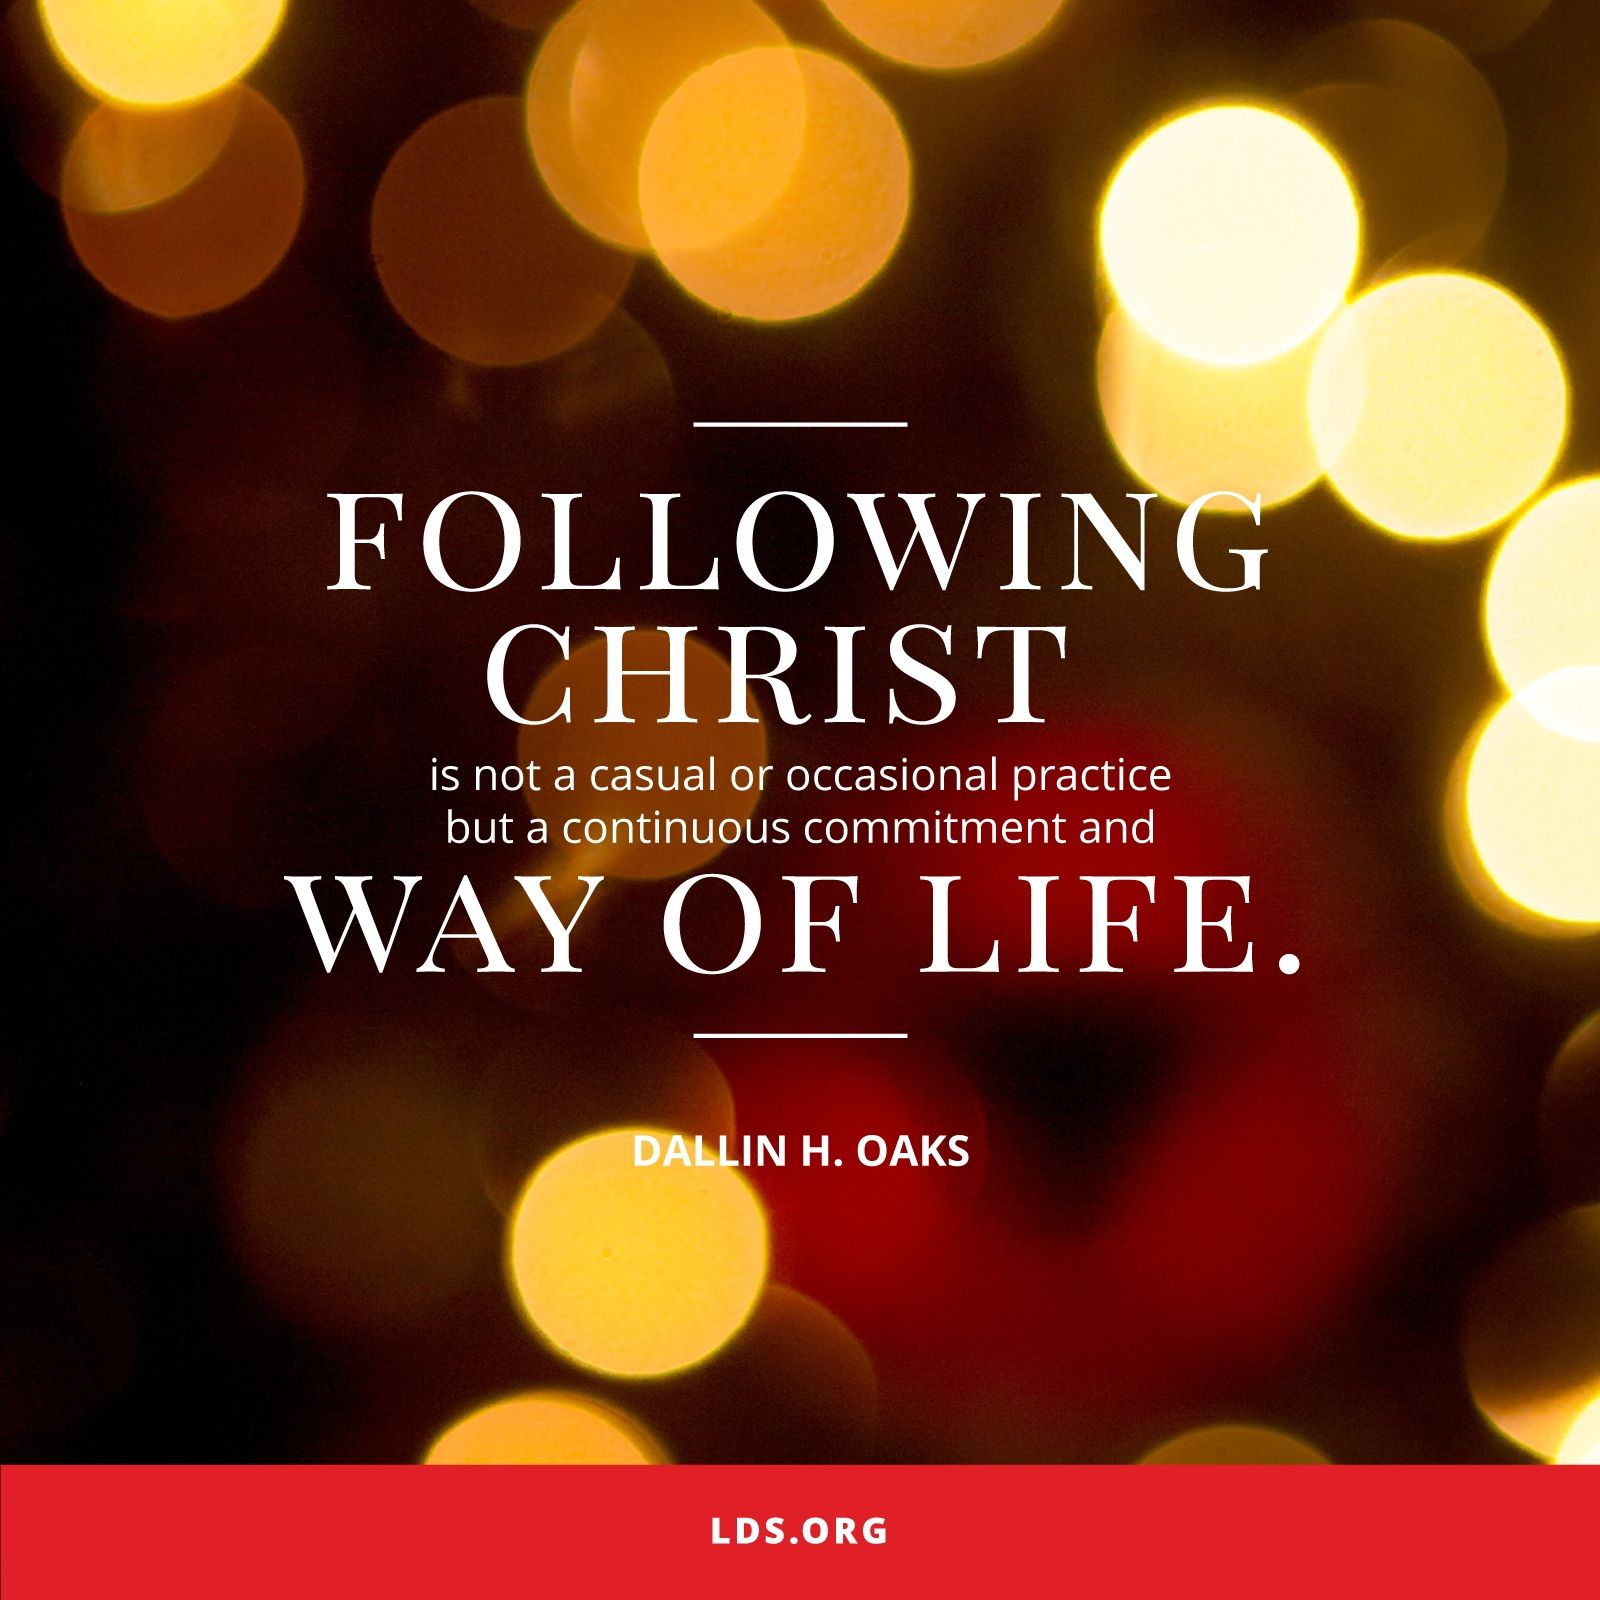 “Following Christ is not a casual or occasional practice but a continuous commitment and way of life.”—Elder Dallin H. Oaks, “Followers of Christ” © undefined ipCode 1.